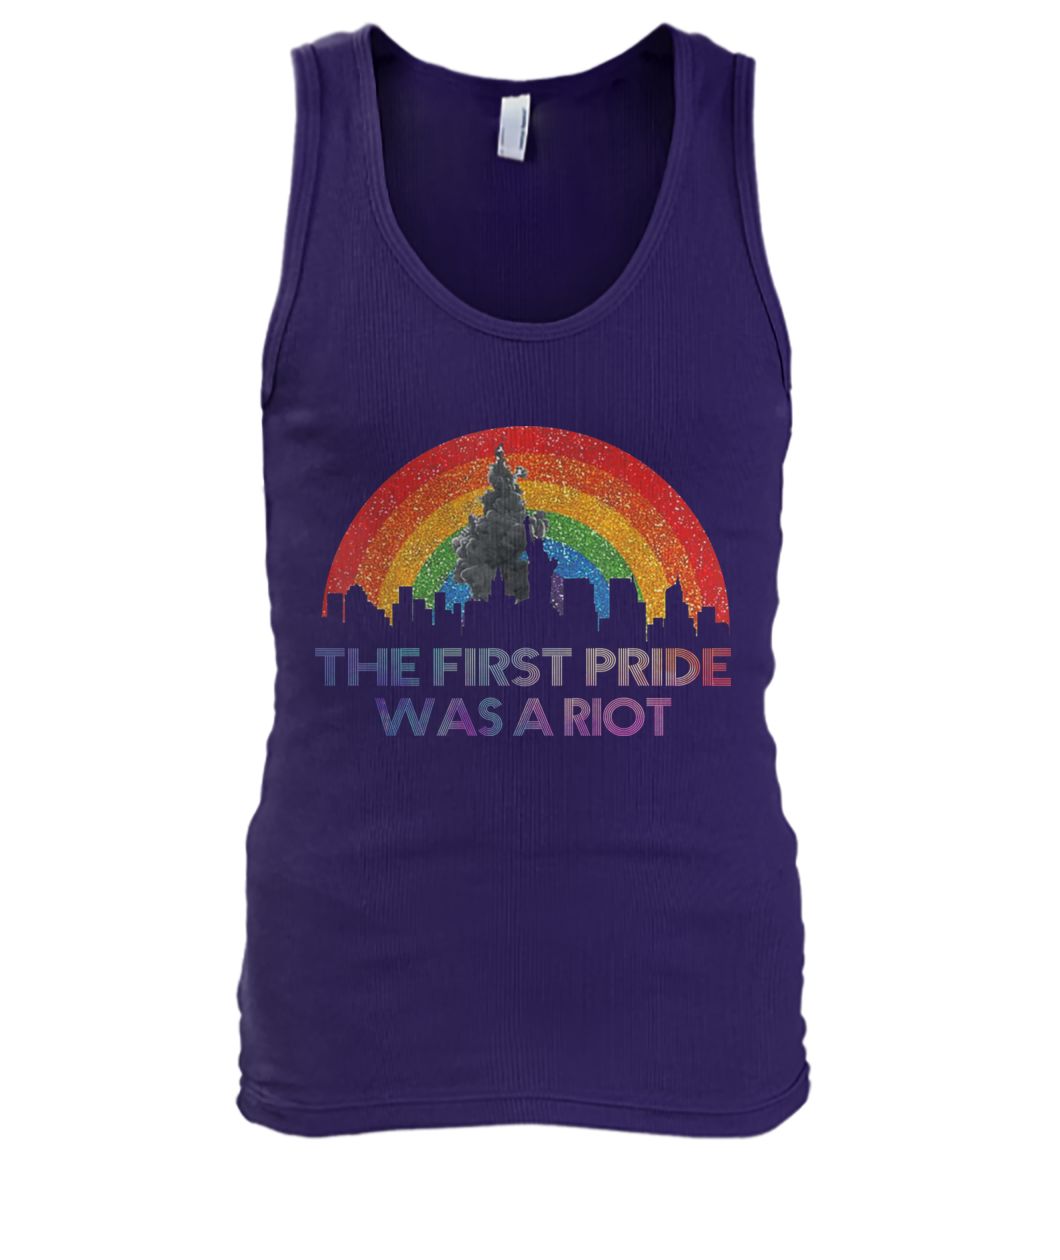 The first gay pride was a riot LGBT men's tank top